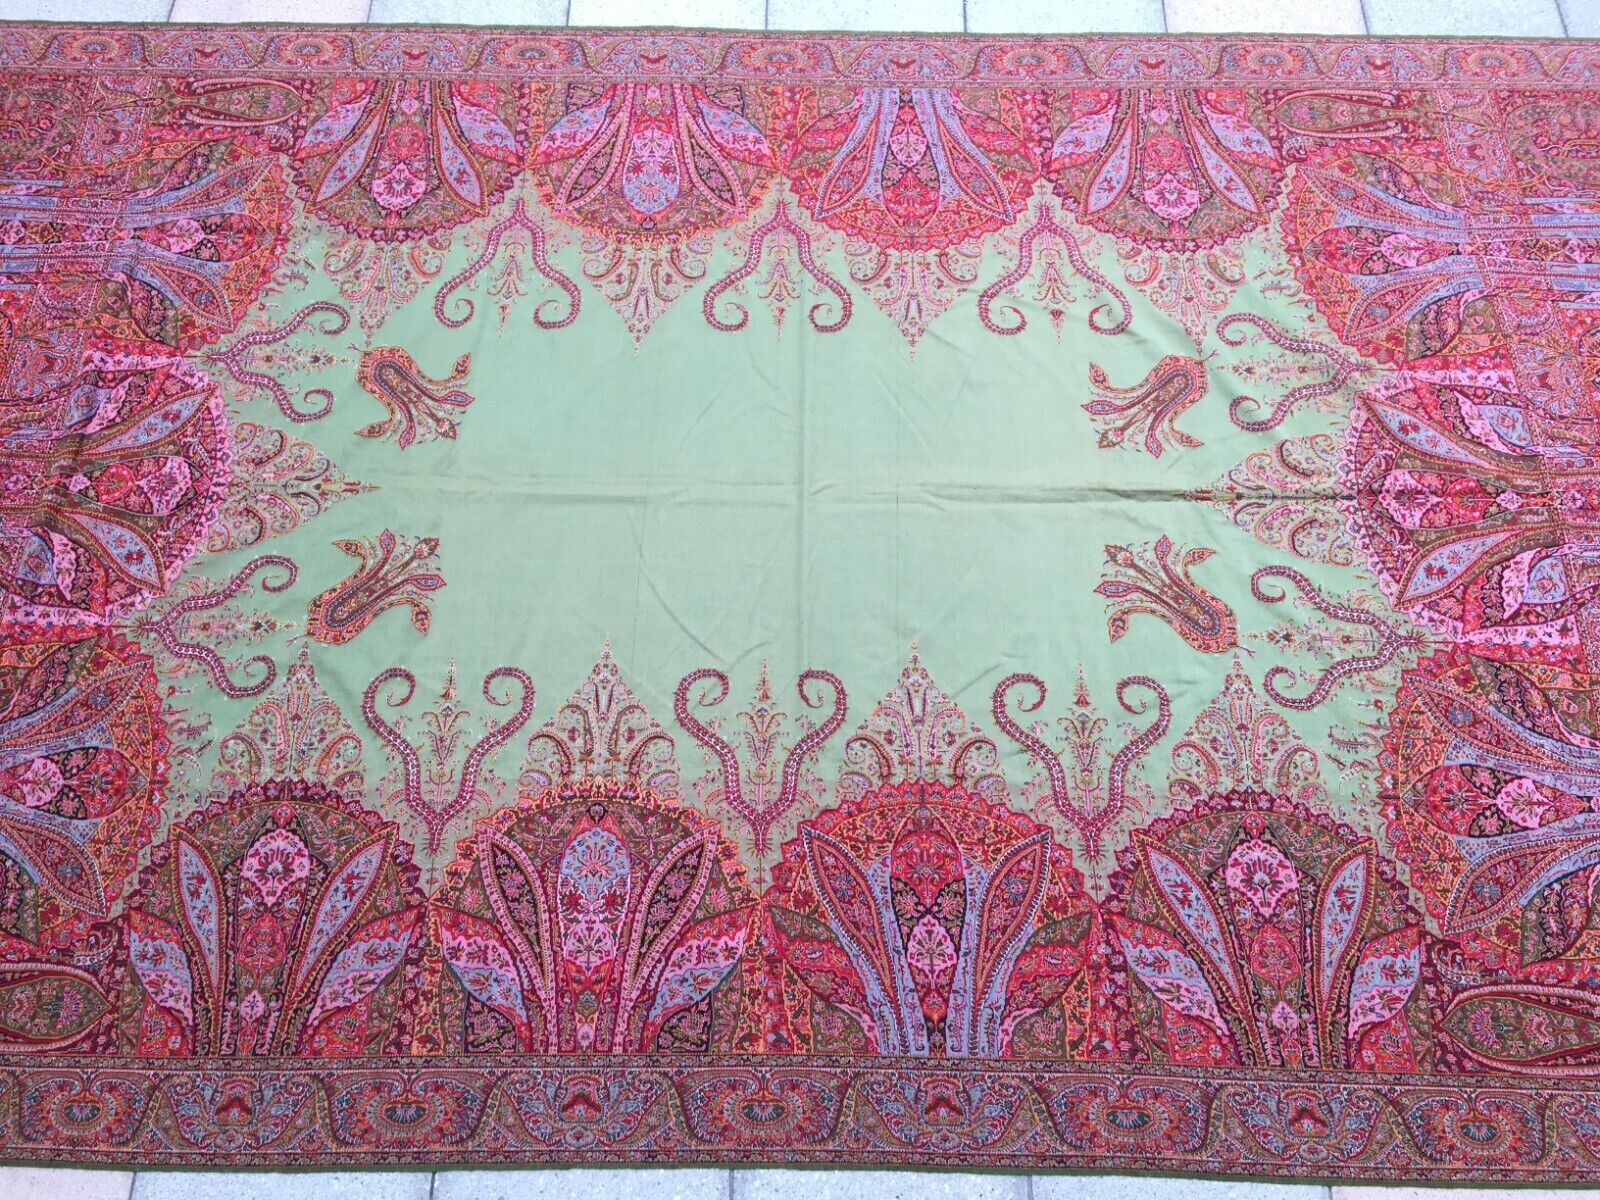 Quality Wool Kashmir Material Enhancing Durability and Comfort on Antique Shawl - 1870s